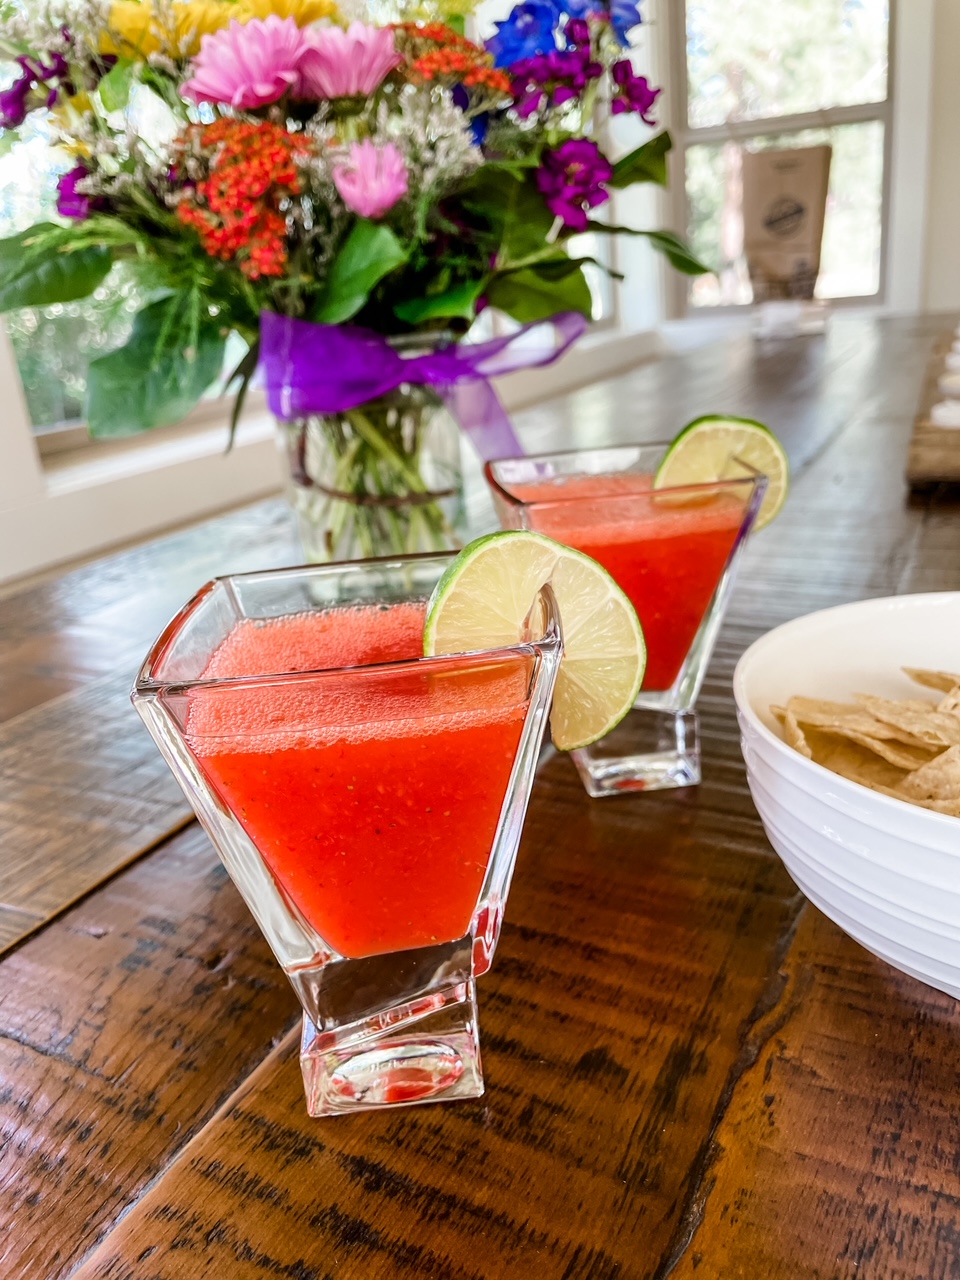 Two cups of the finished Fresh Strawberry Margaritas on a table